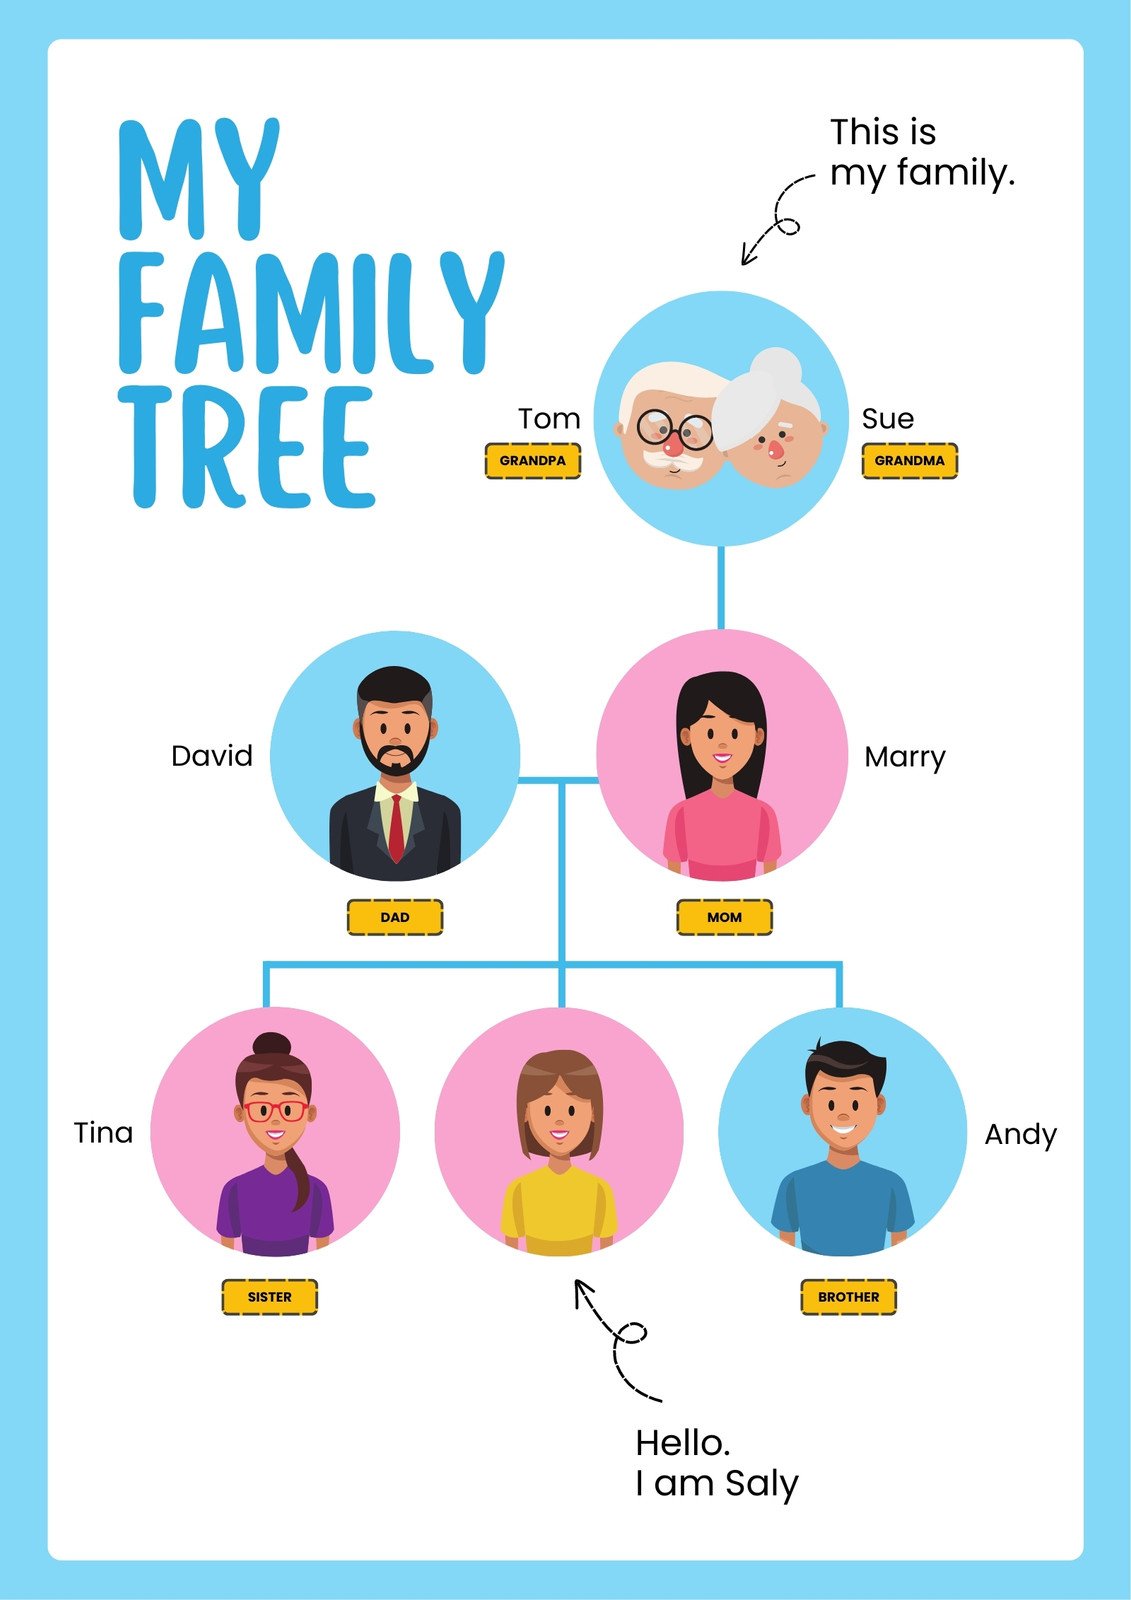 How to create a family tree diagram | MiroBlog